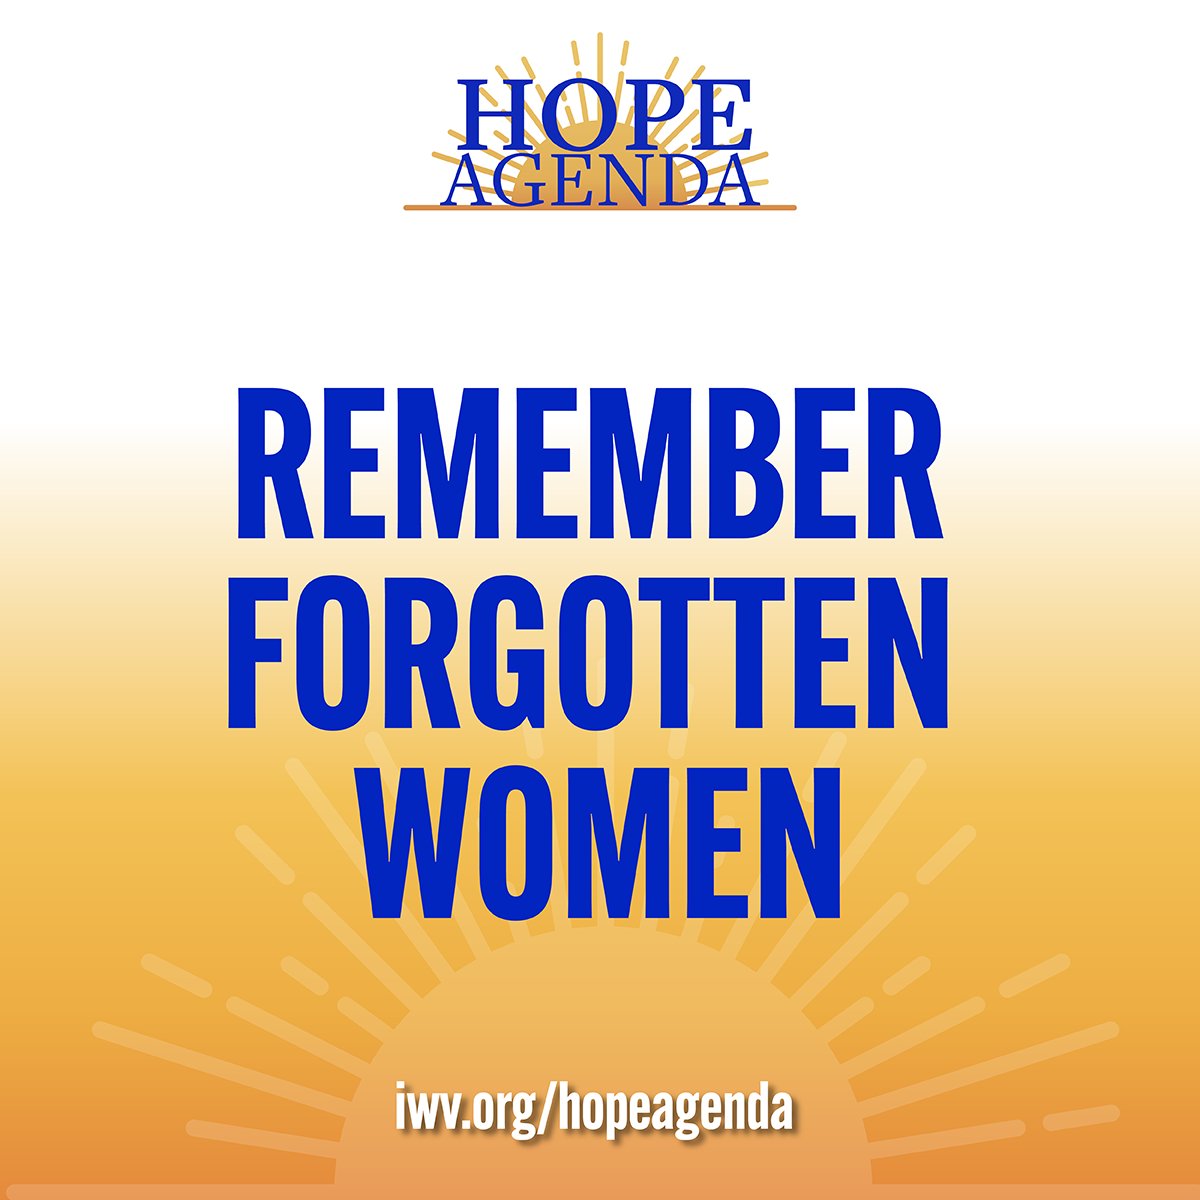 Polling from @IWF identified that 89% of women worry they can’t afford to retire & won’t be able to find comparable work if they lose their current jobs. Find out how lawmakers can boost security for women over 50 👇 #HopeAgenda iwv.org/remember-forgo…